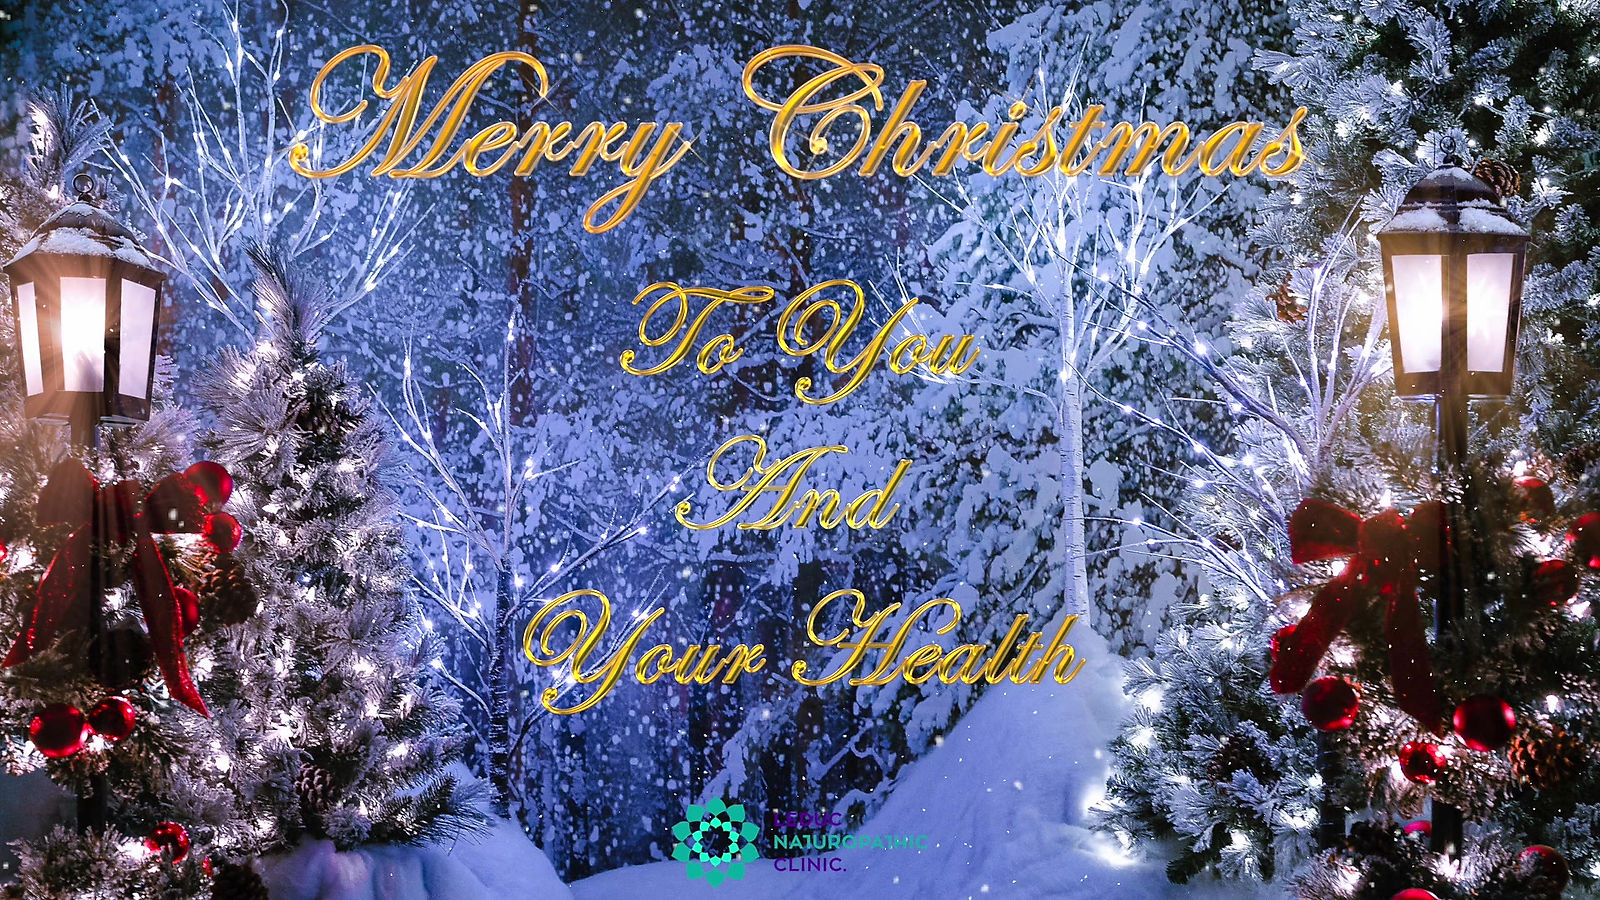 Merry Christmas Video Card  From Leduc Naturopathic Clinic